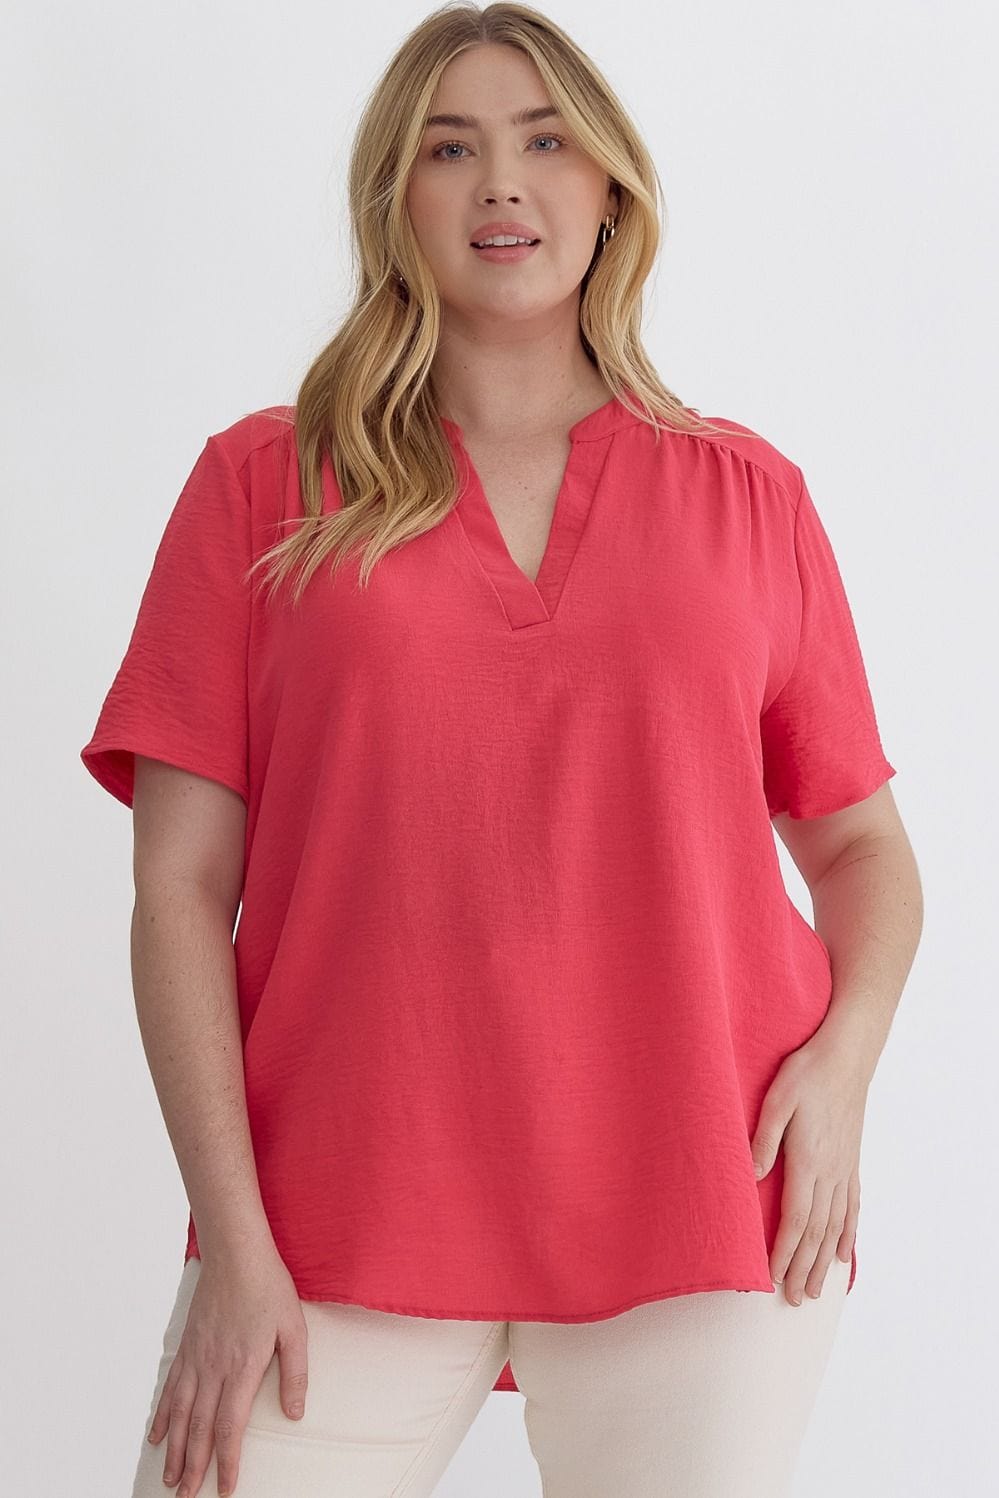 Red Short Sleeve Top | XL-2X Entro Plus Size XL